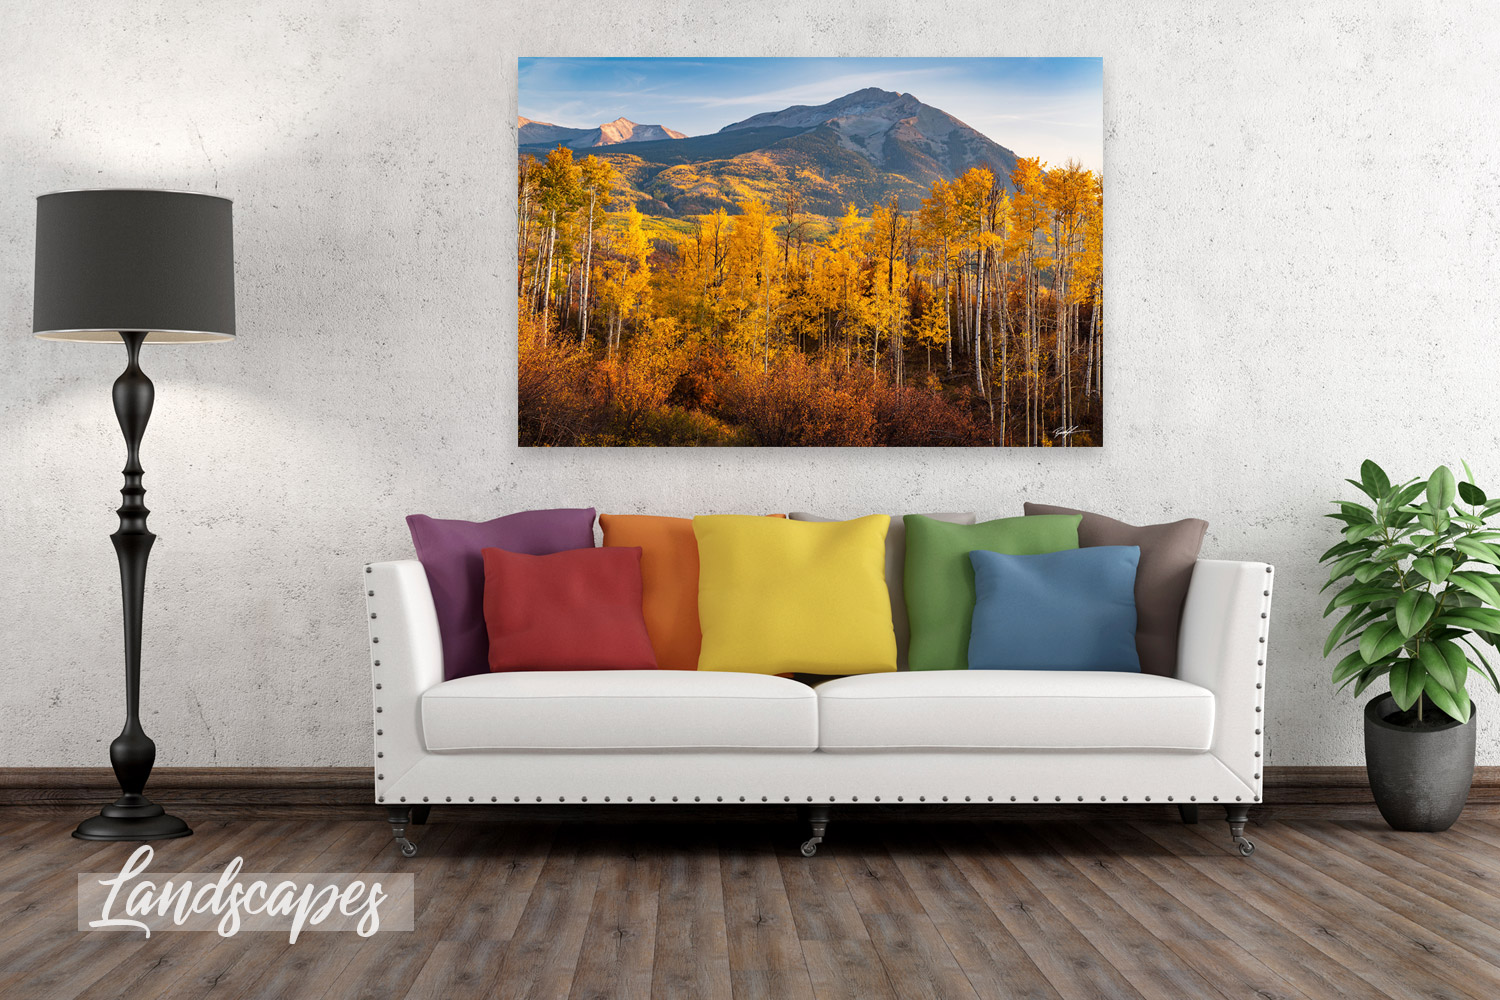 Home and Office Decor - Landscape Photography